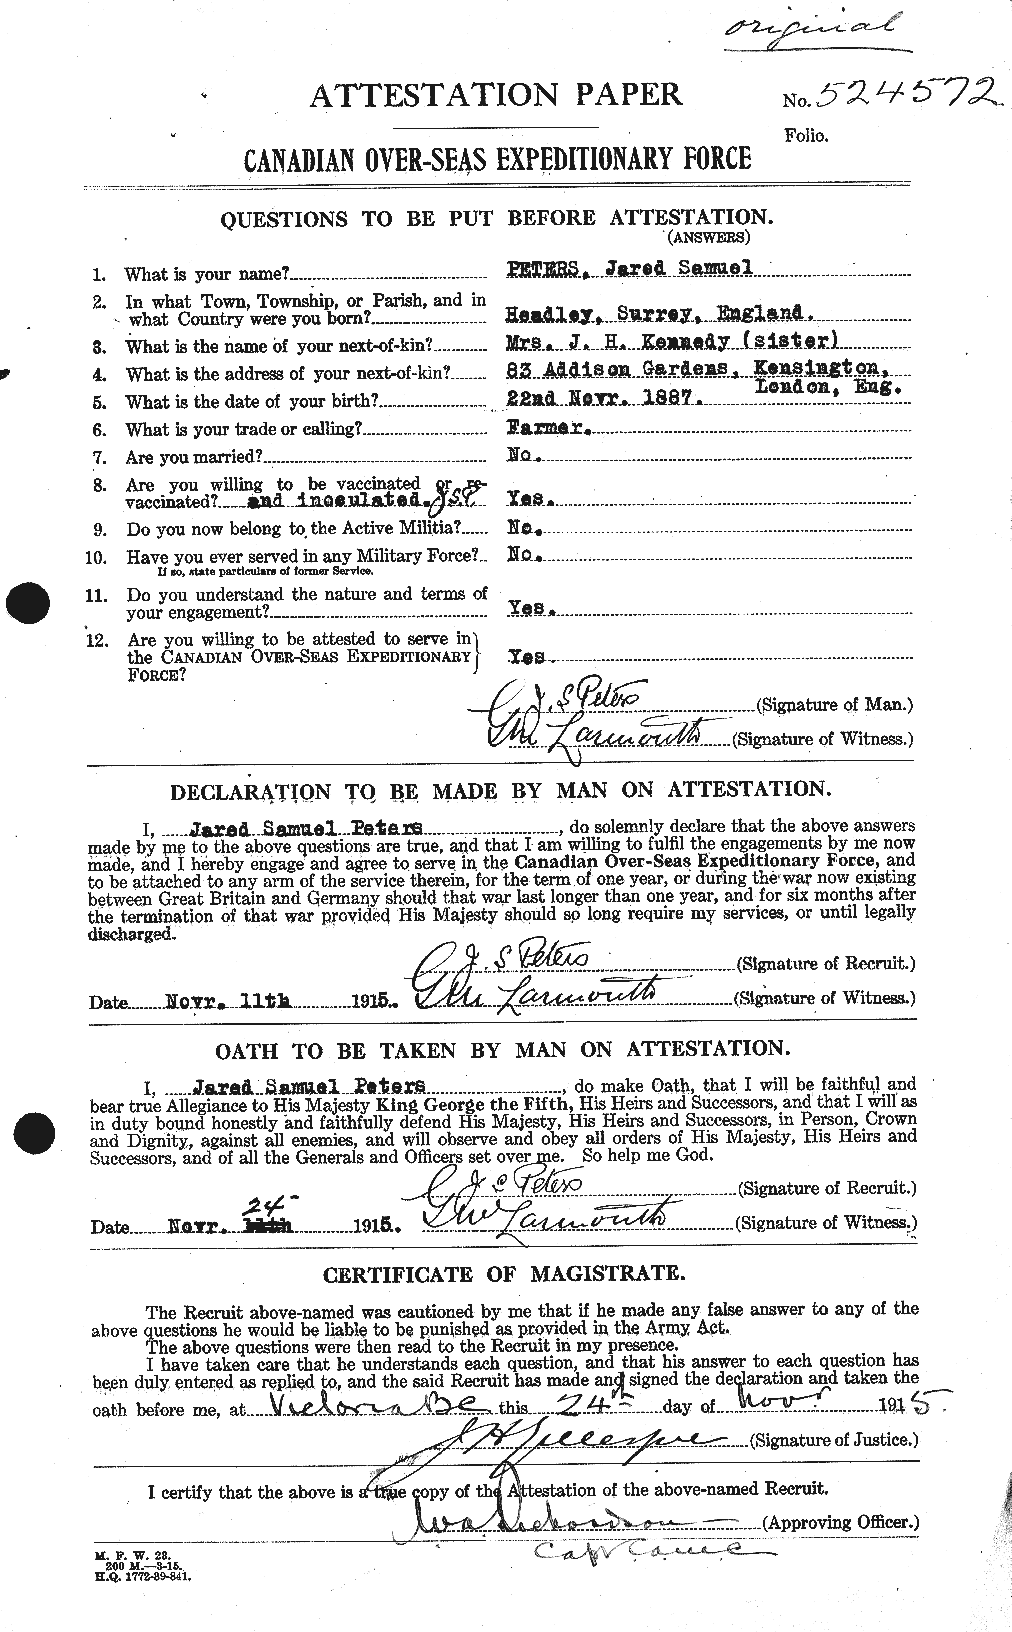 Personnel Records of the First World War - CEF 575531a